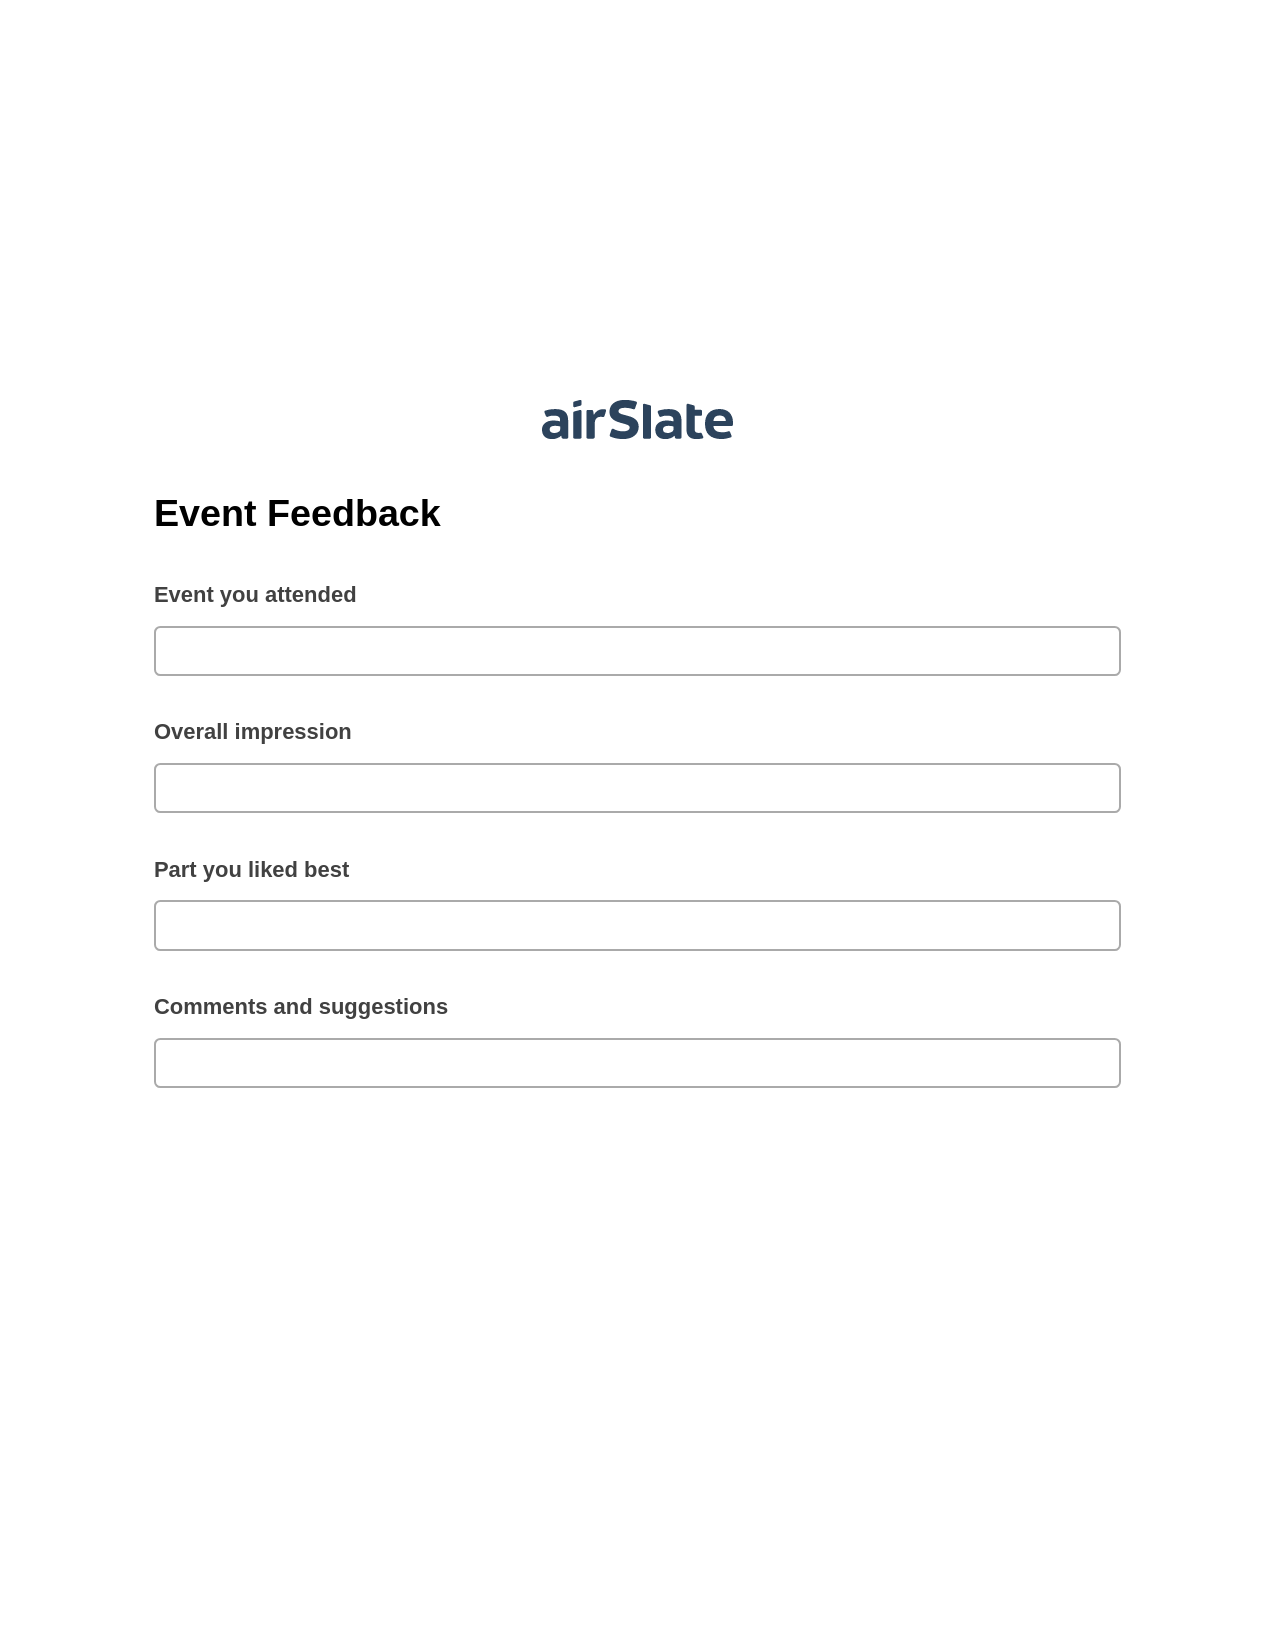 Event Feedback Pre-fill Slate from MS Dynamics 365 Records Bot, Slack Notification Bot, Export to Excel 365 Bot